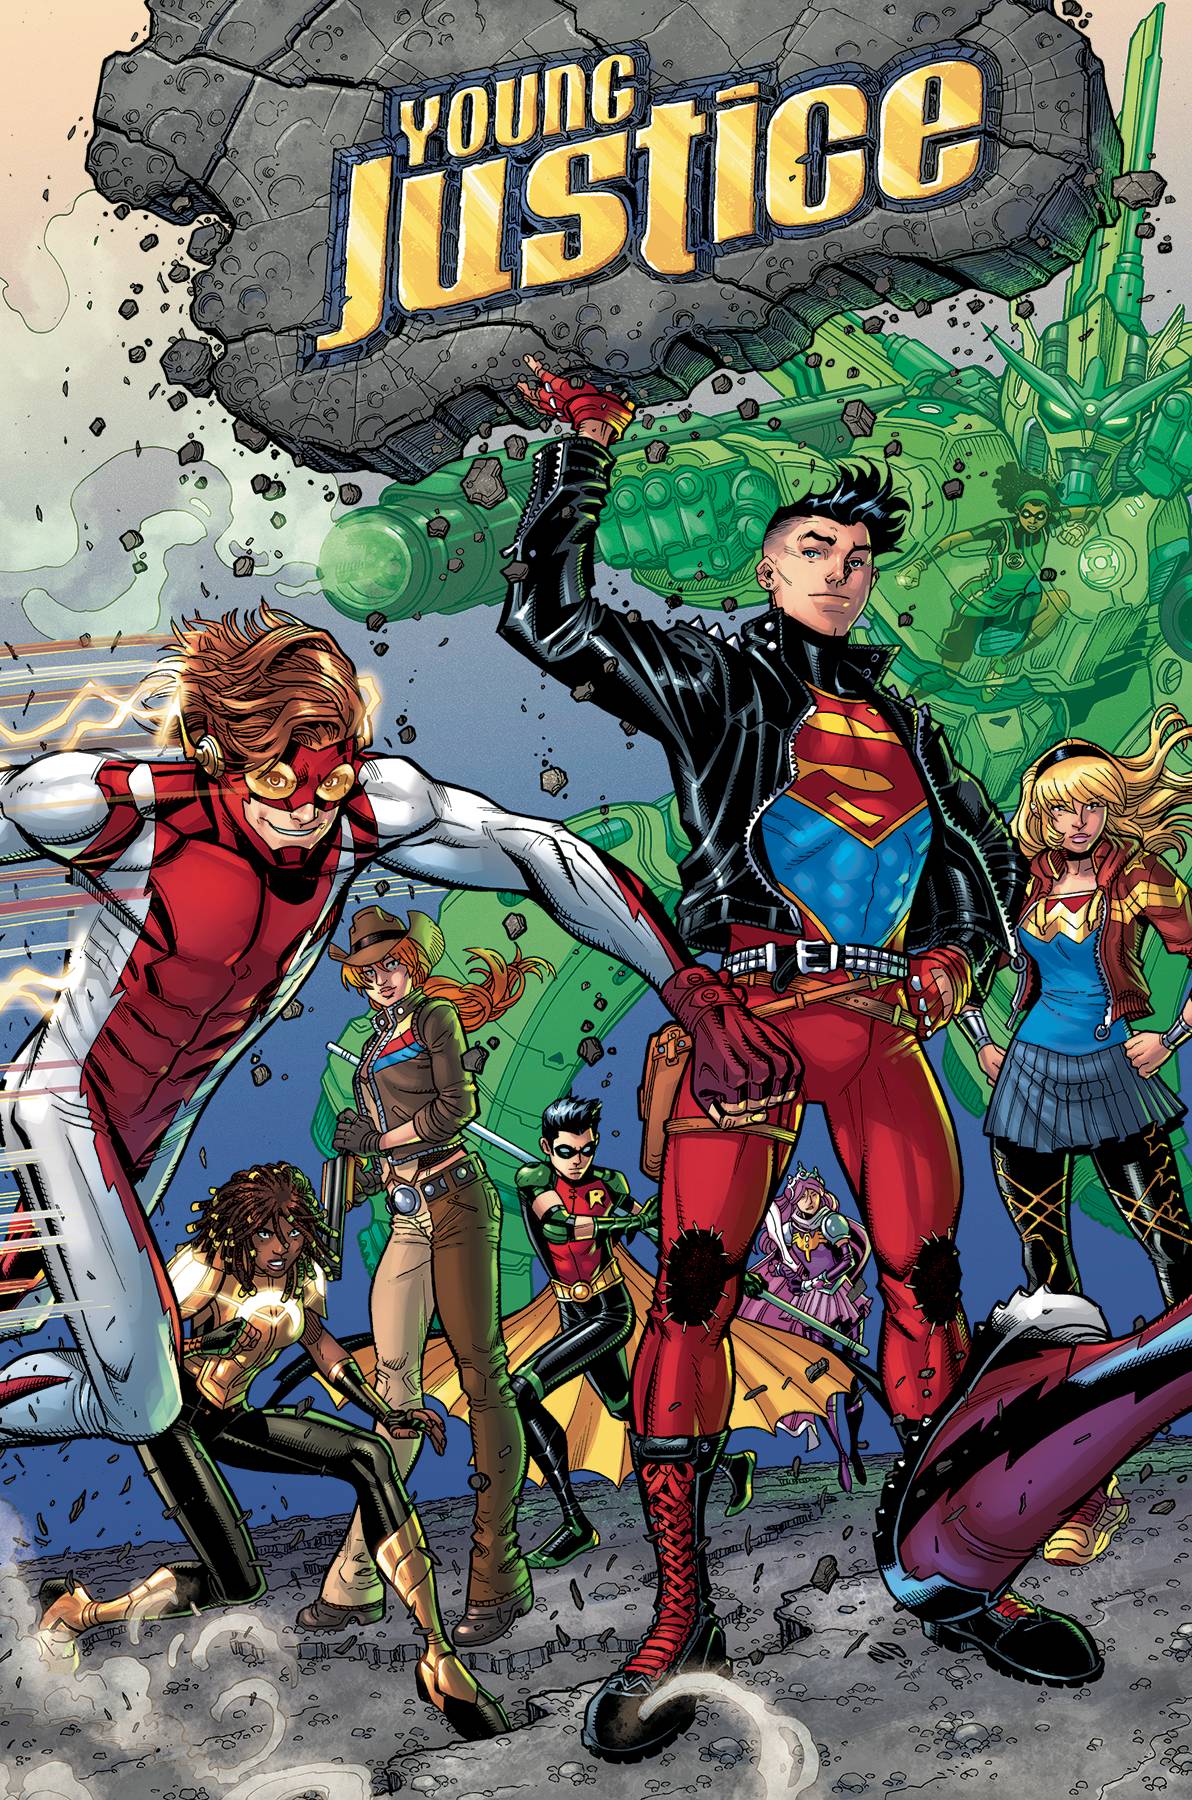 11/06/2019 YOUNG JUSTICE #10 VAR ED